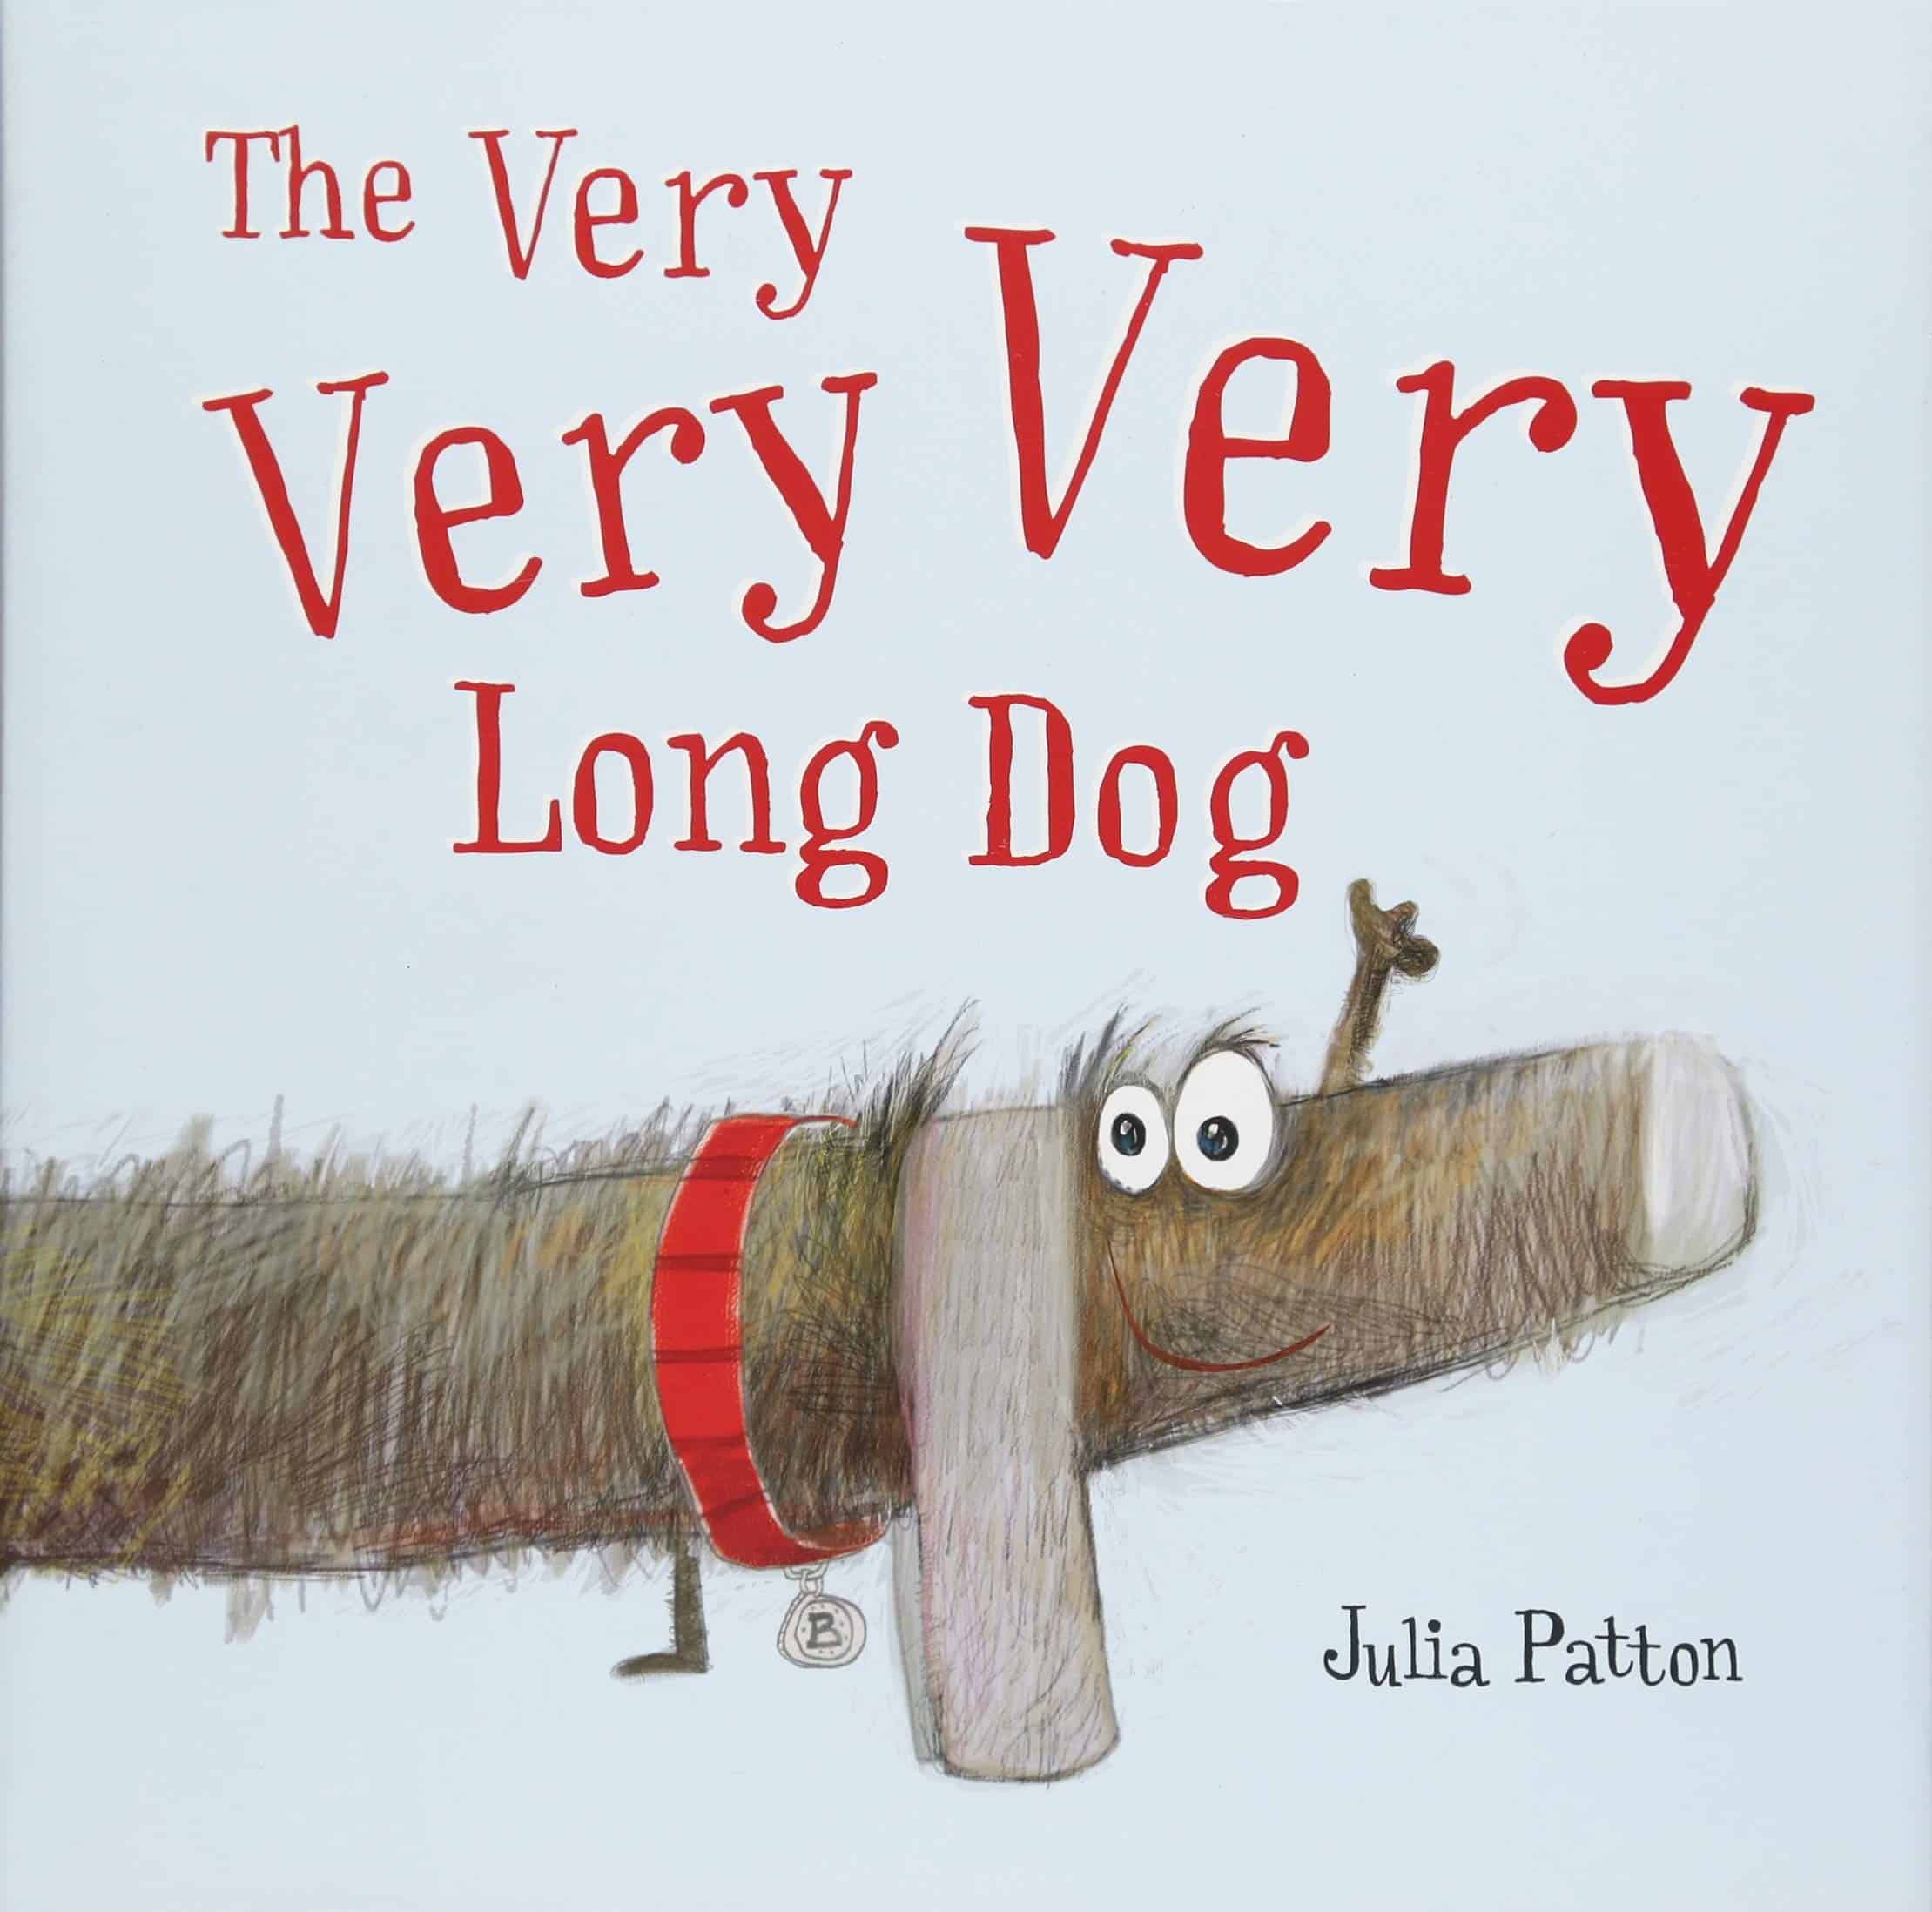 The Very Very Very Long Dog book by Julia Patton